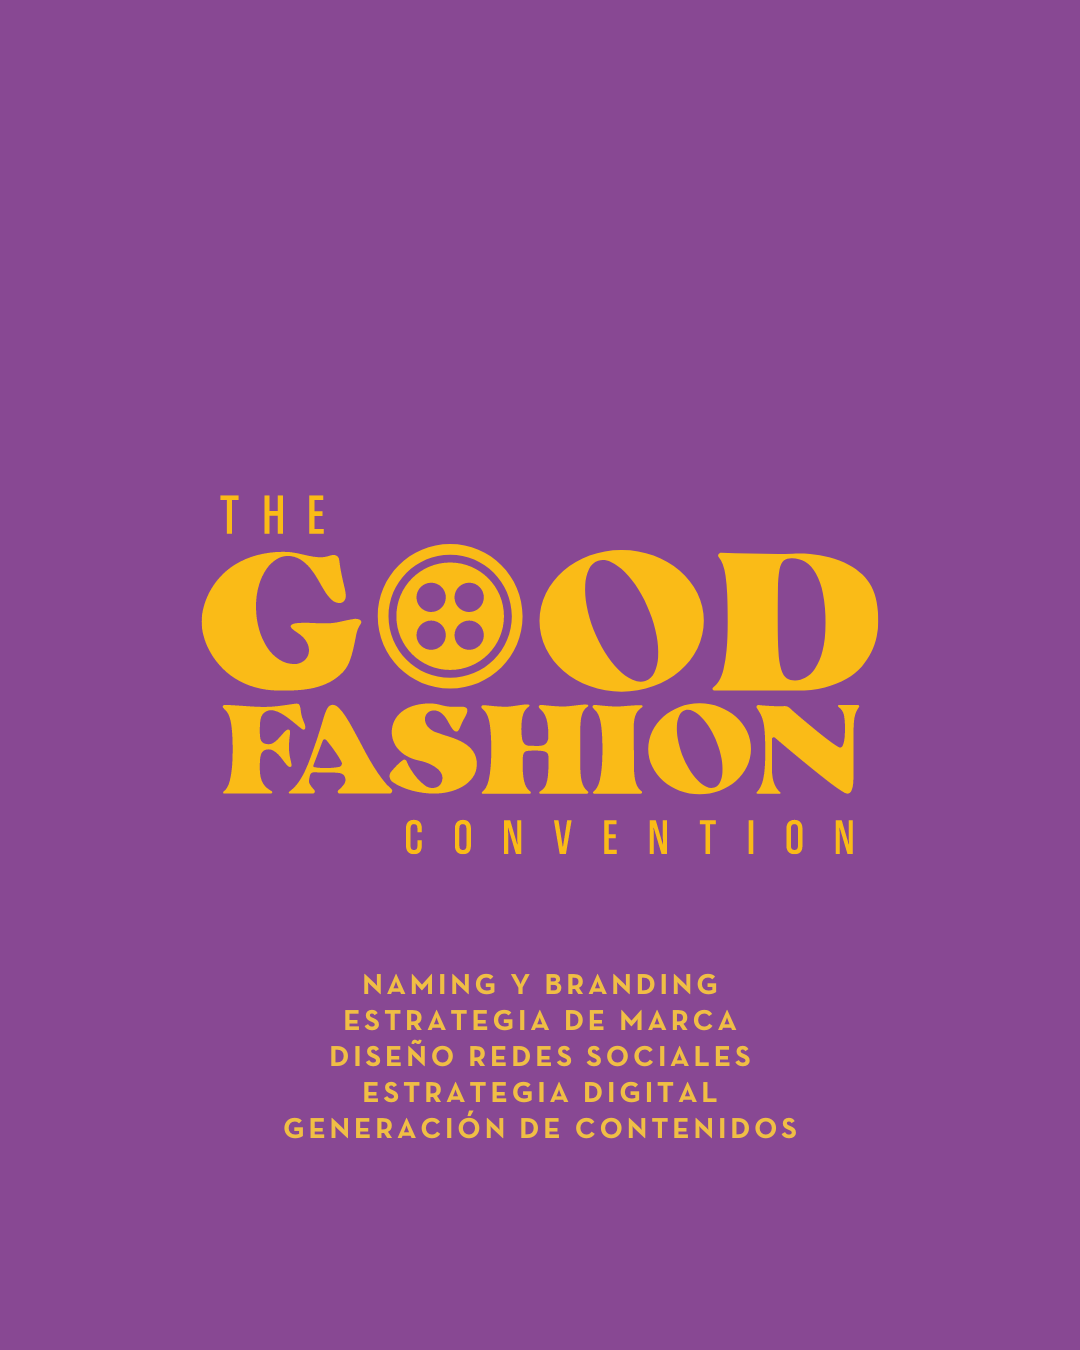 The good fashion Convention